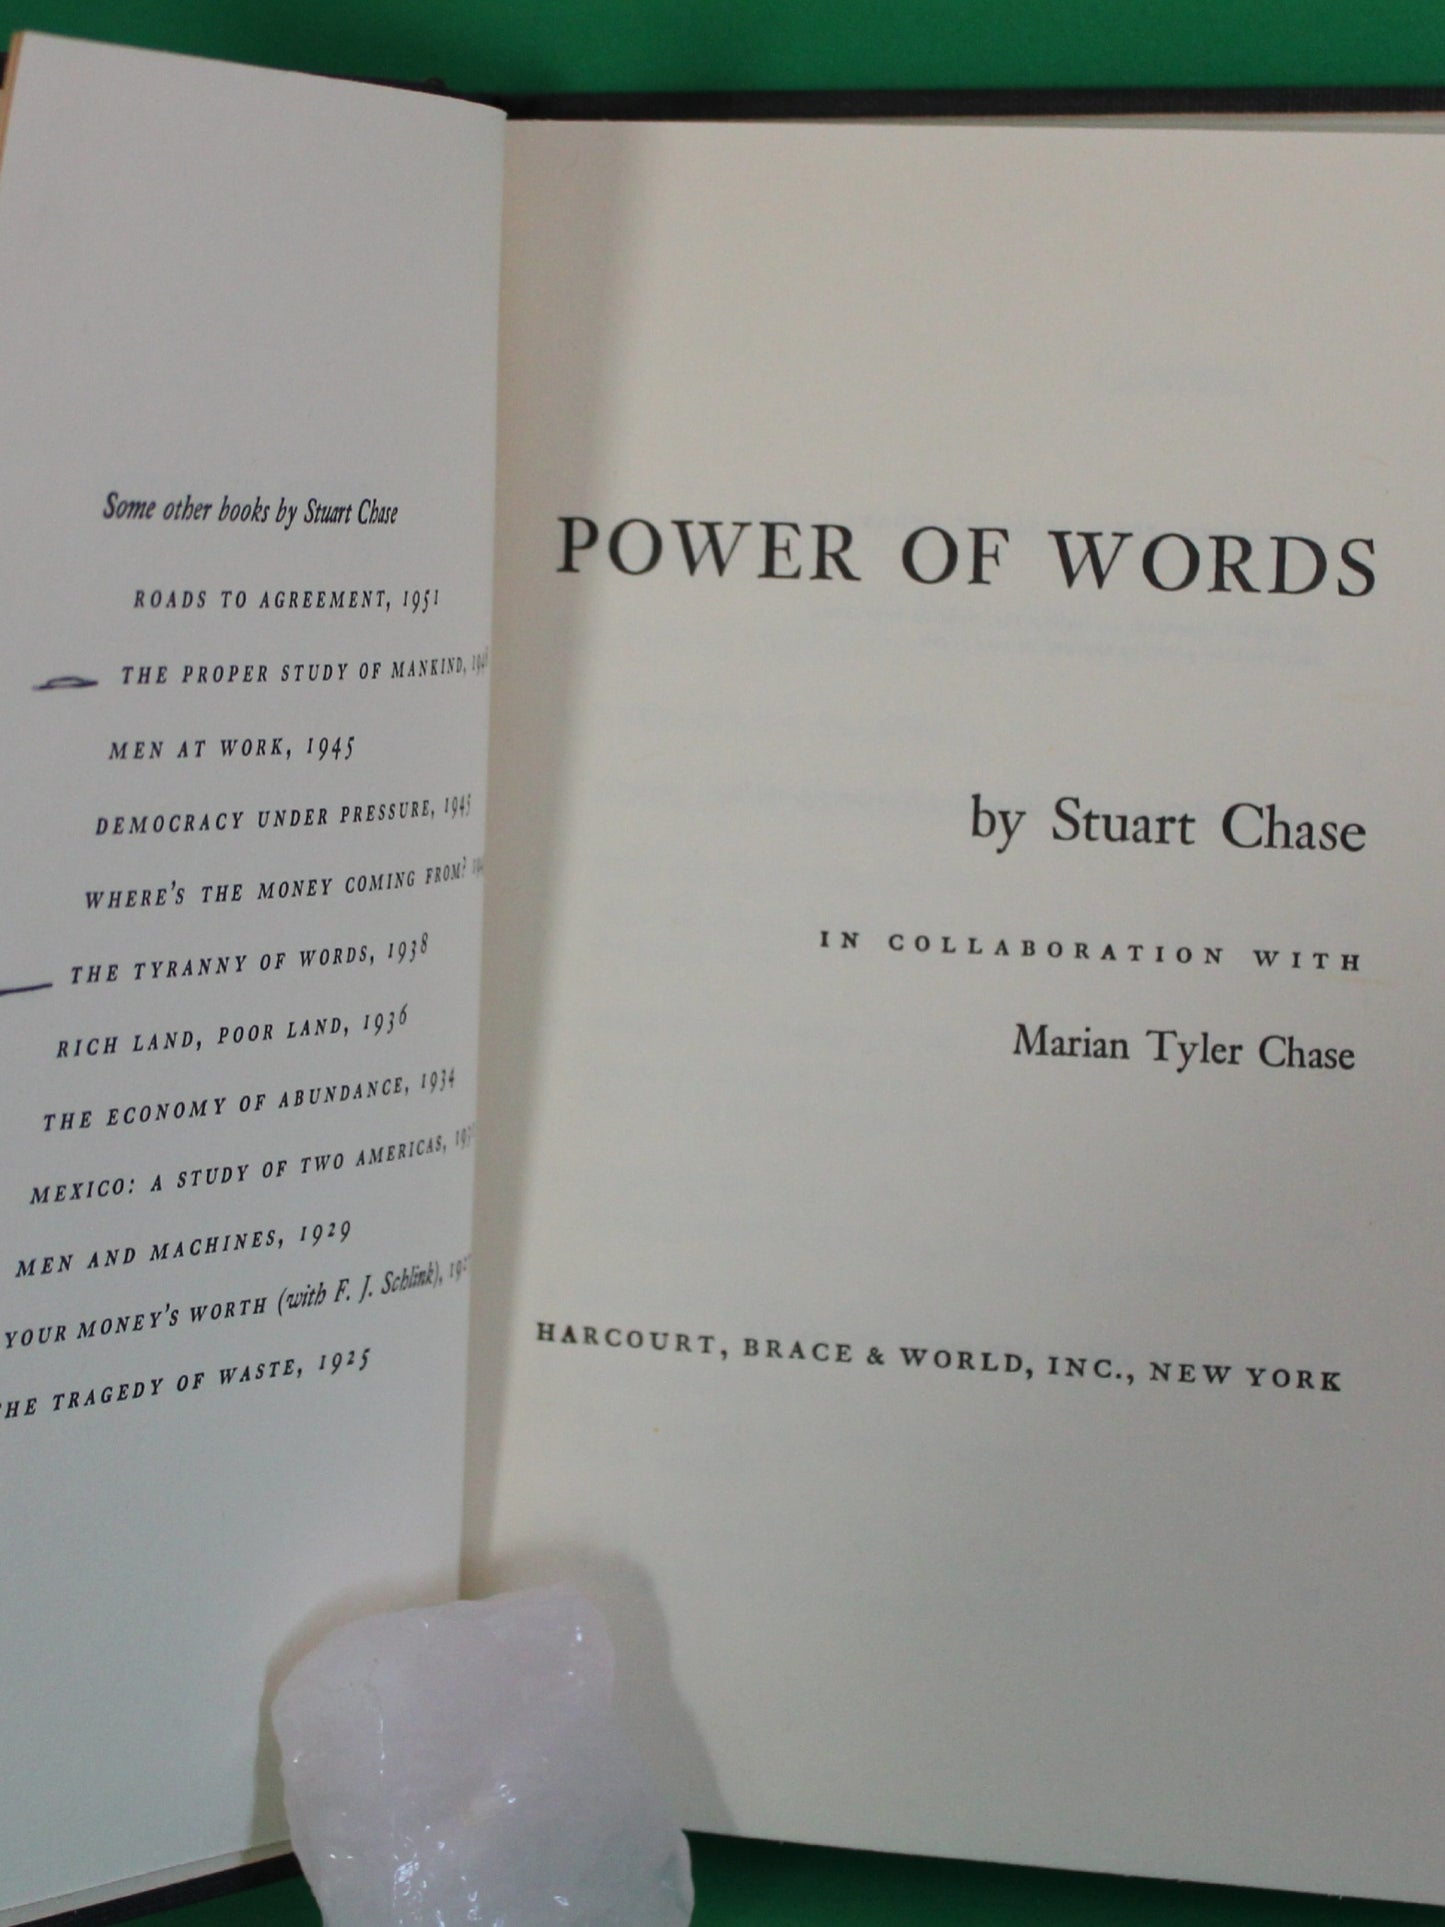 "Power of Words"